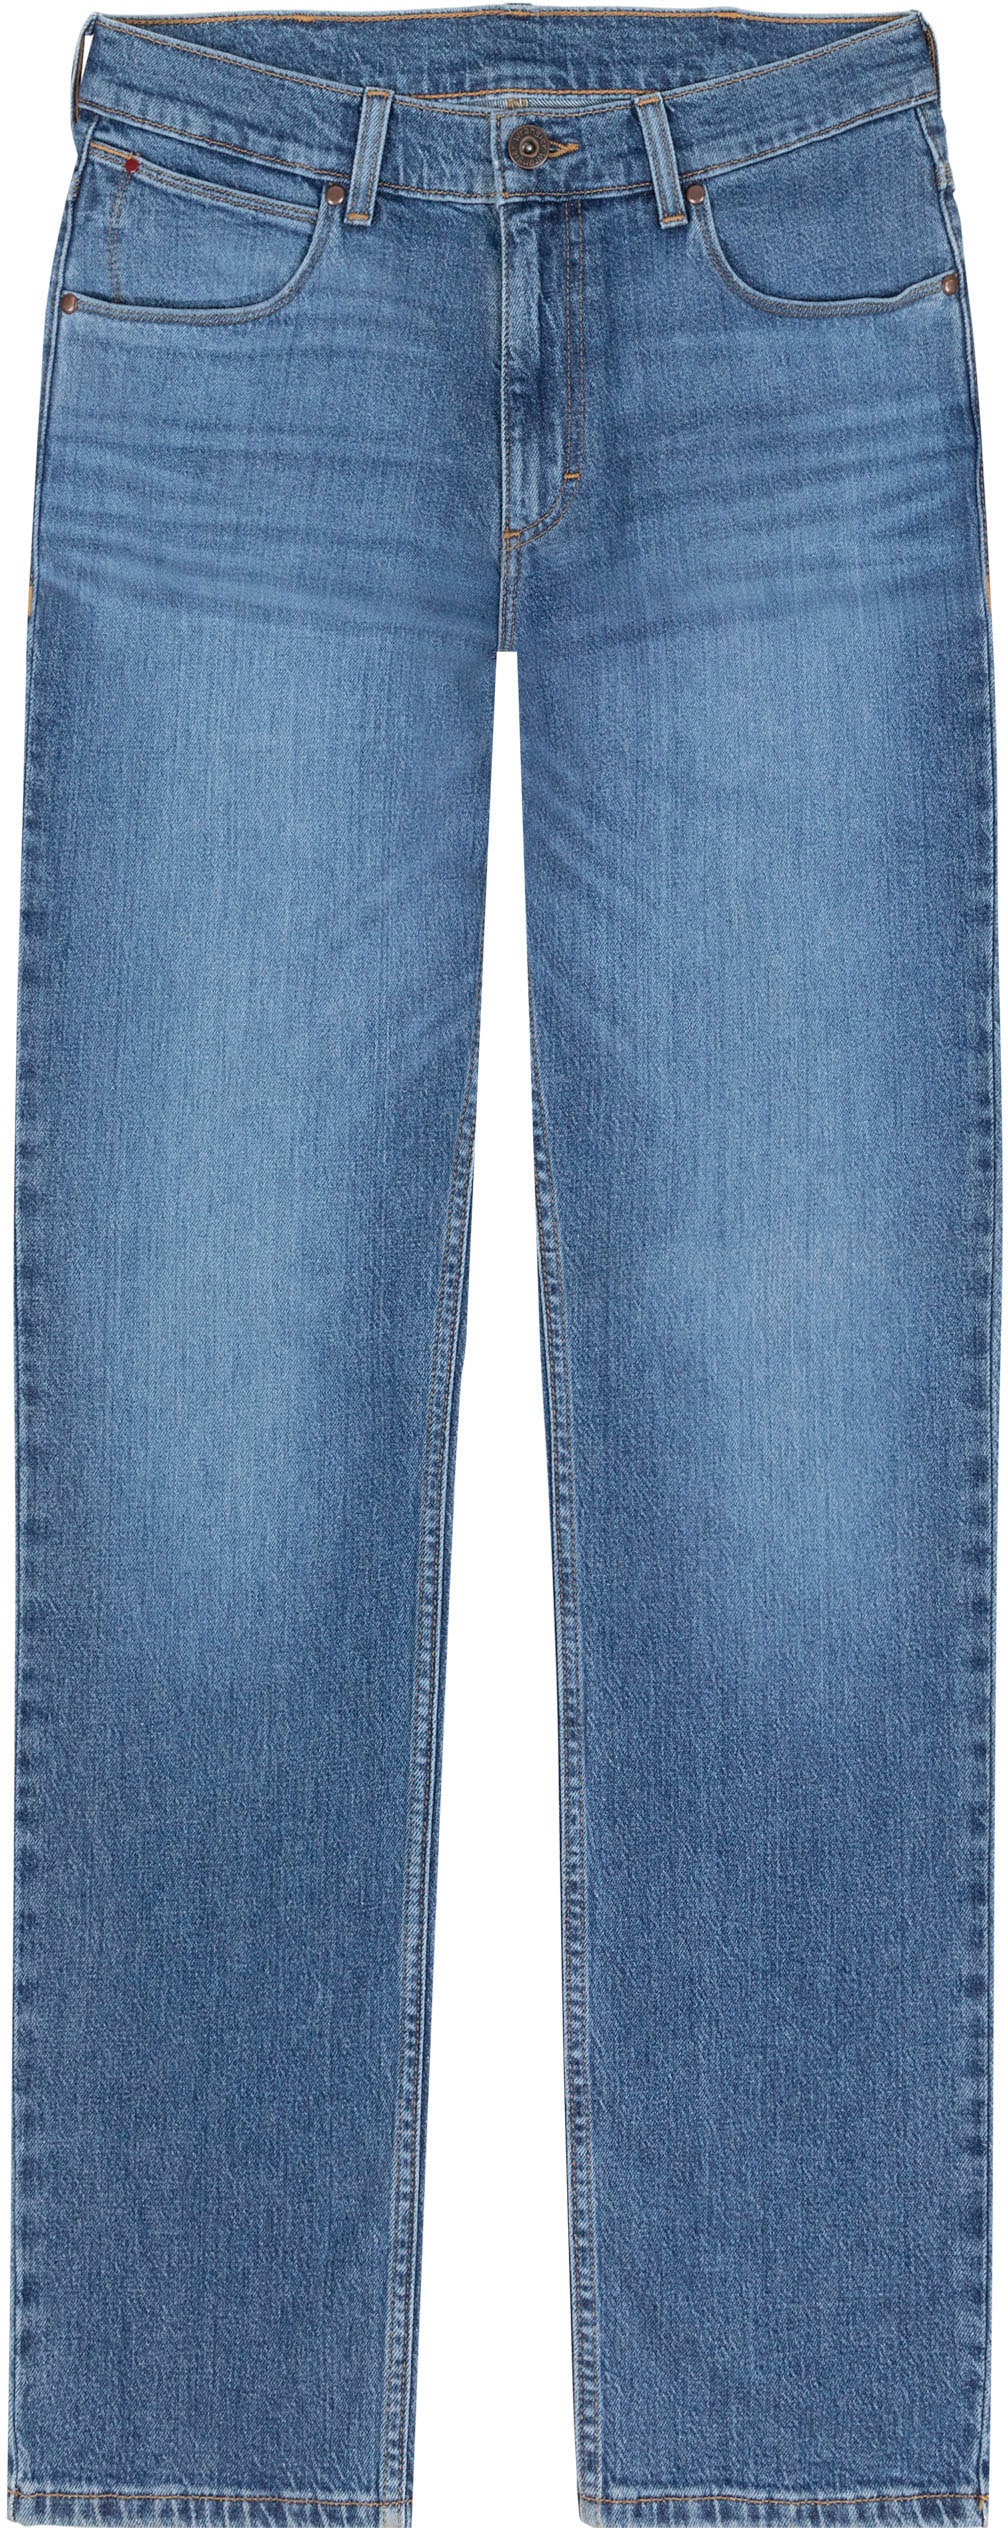 Wrangler Straight-Jeans »Authentic Straight« bequem kaufen